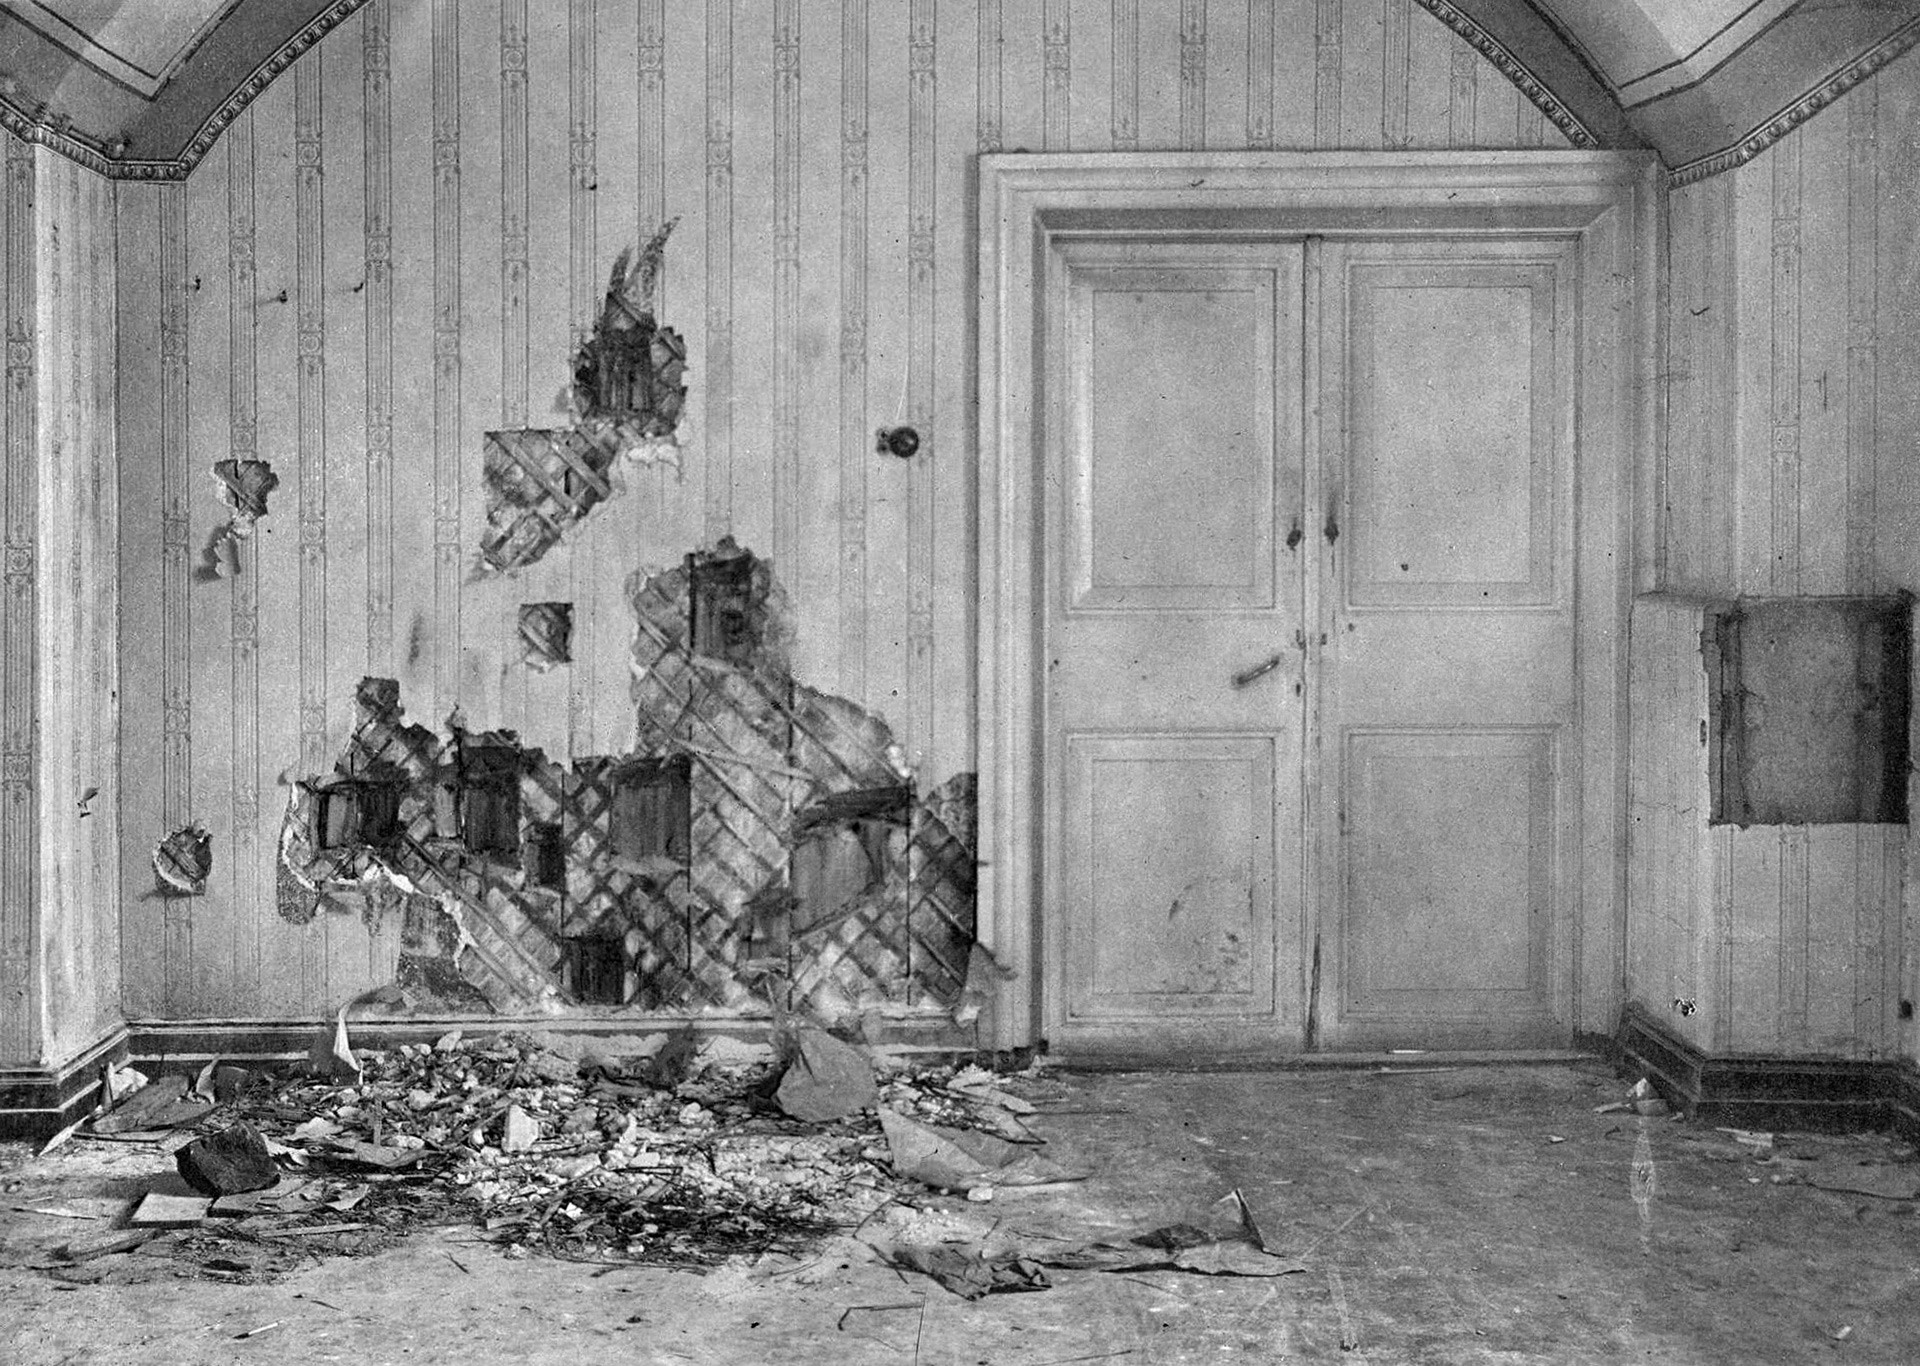 The basement of the Ipatiev house where the Romanov family was killed